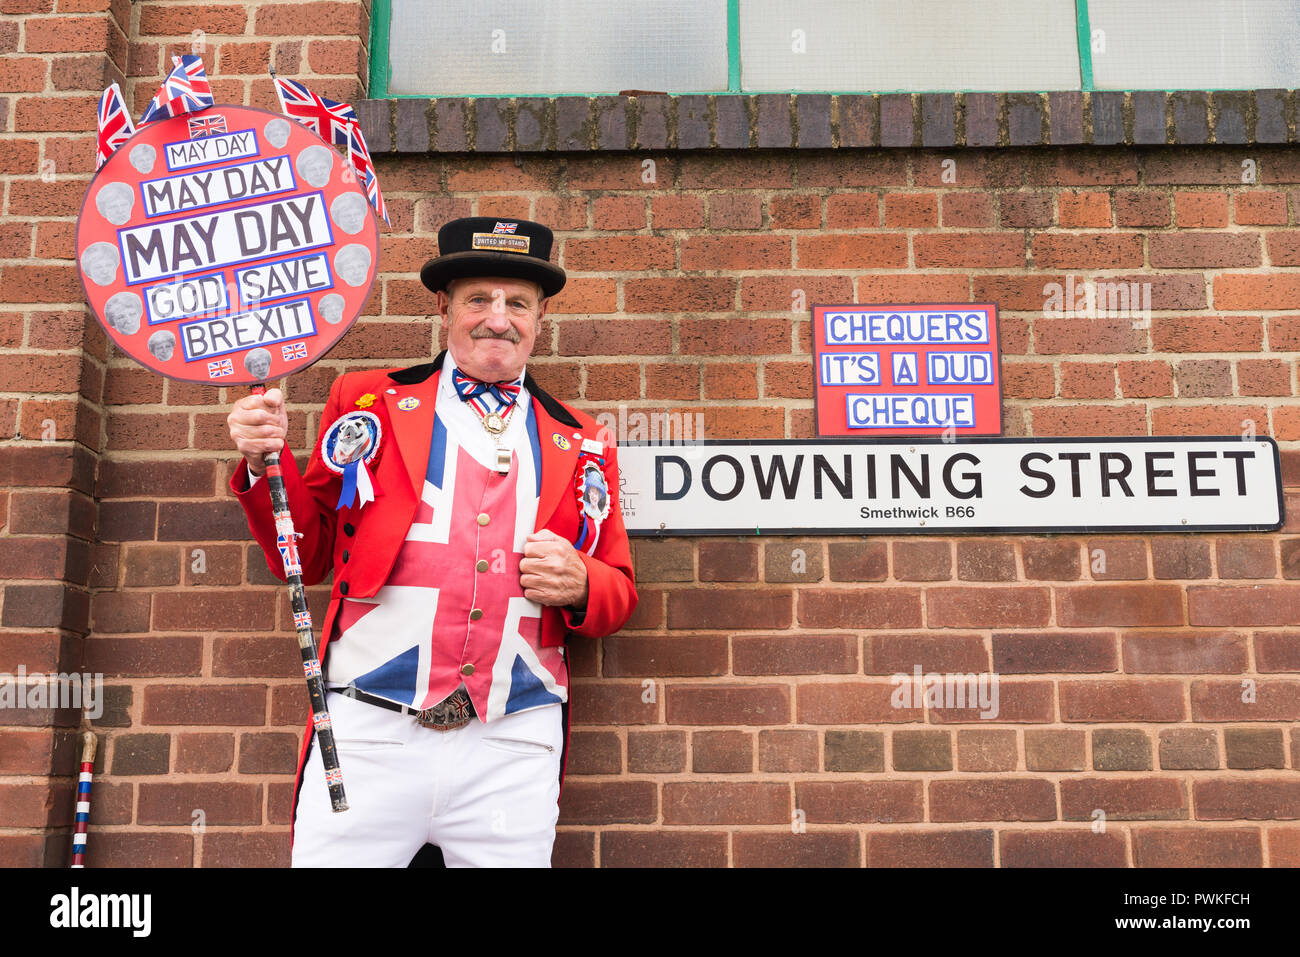 Downing Street,Smethwick,West Midlands. 17 October 2018. As Theresa May heads to Brussels, Pro-Brexit supporter dressed as John Bull protests about lack of progress in Uk's agreement to leave the EU.Credit: Nick Maslen/Alamy Live News Stock Photo